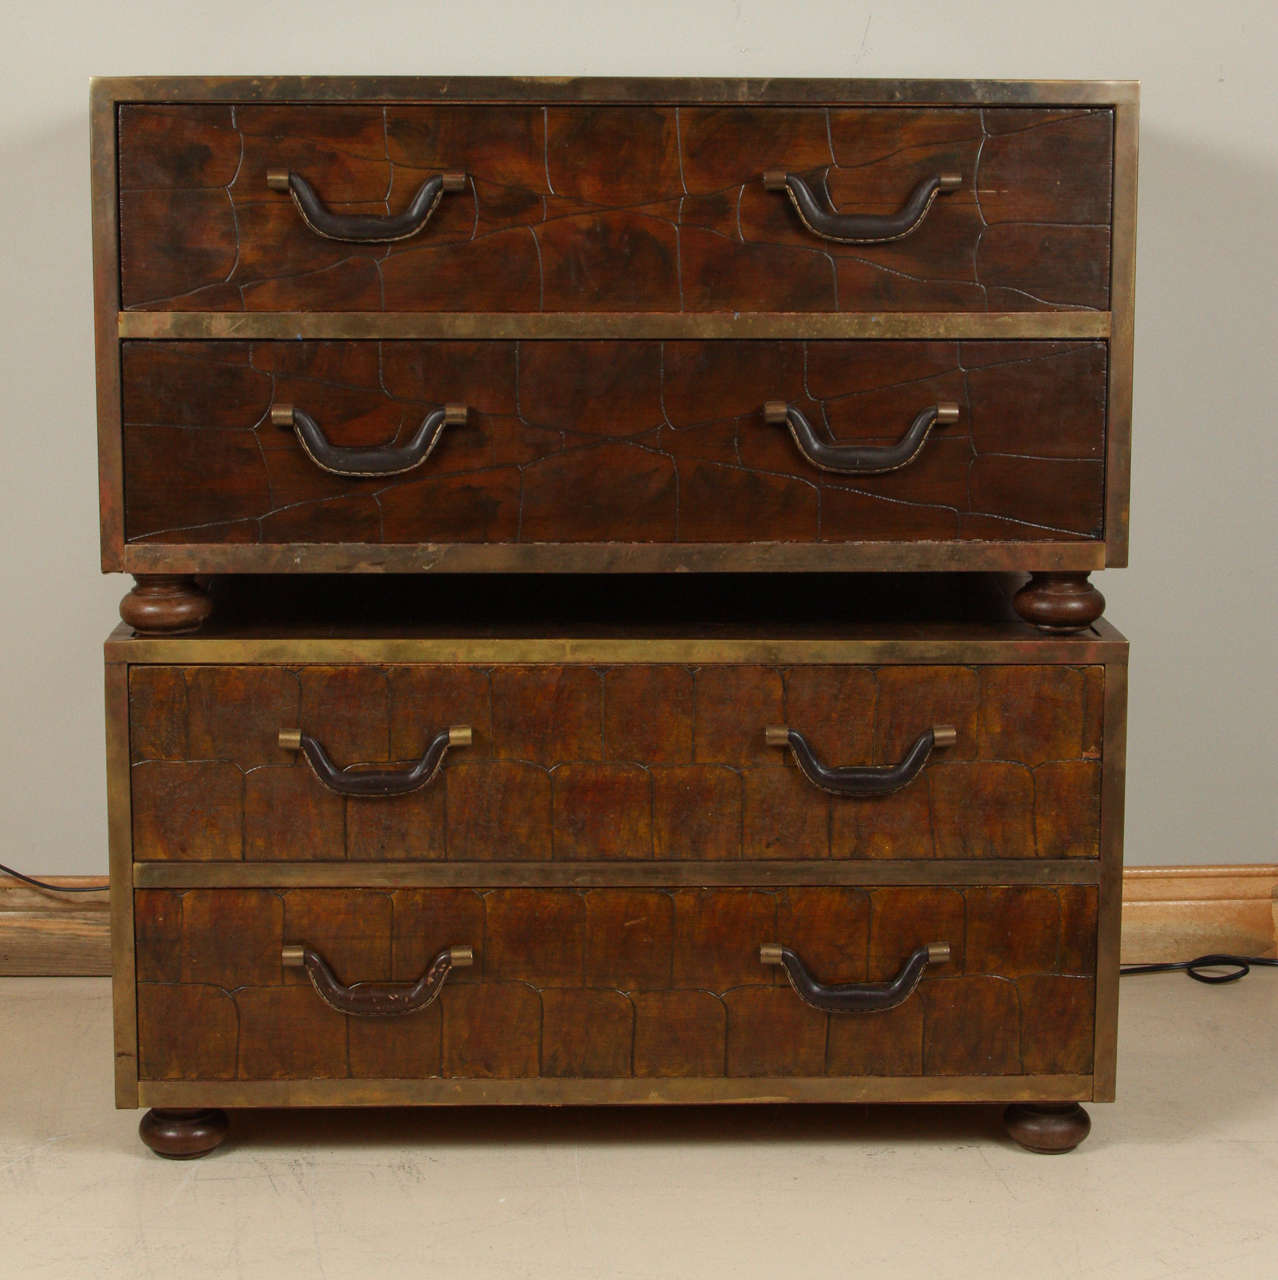 Pair of rare Sarried chests with scribed walnut veneer.